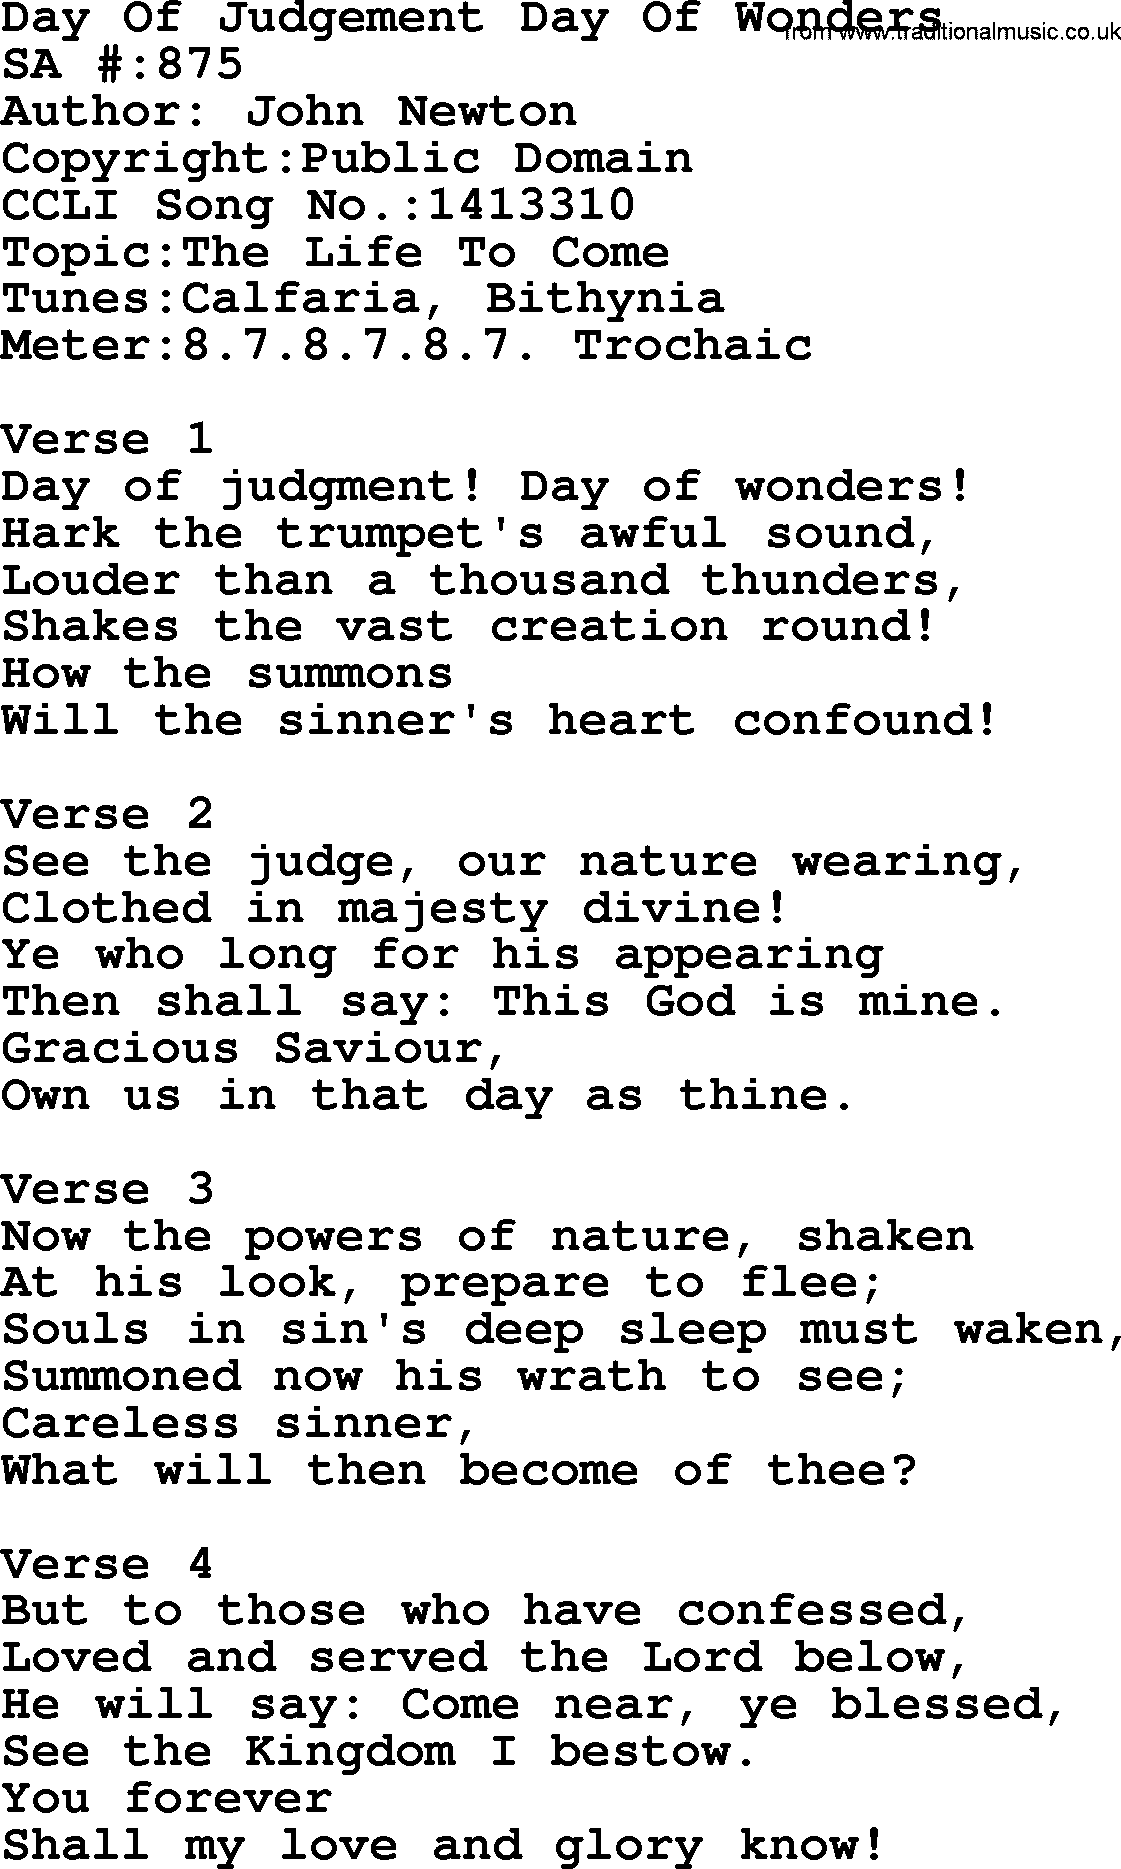 Salvation Army Hymnal, title: Day Of Judgement Day Of Wonders, with lyrics and PDF,